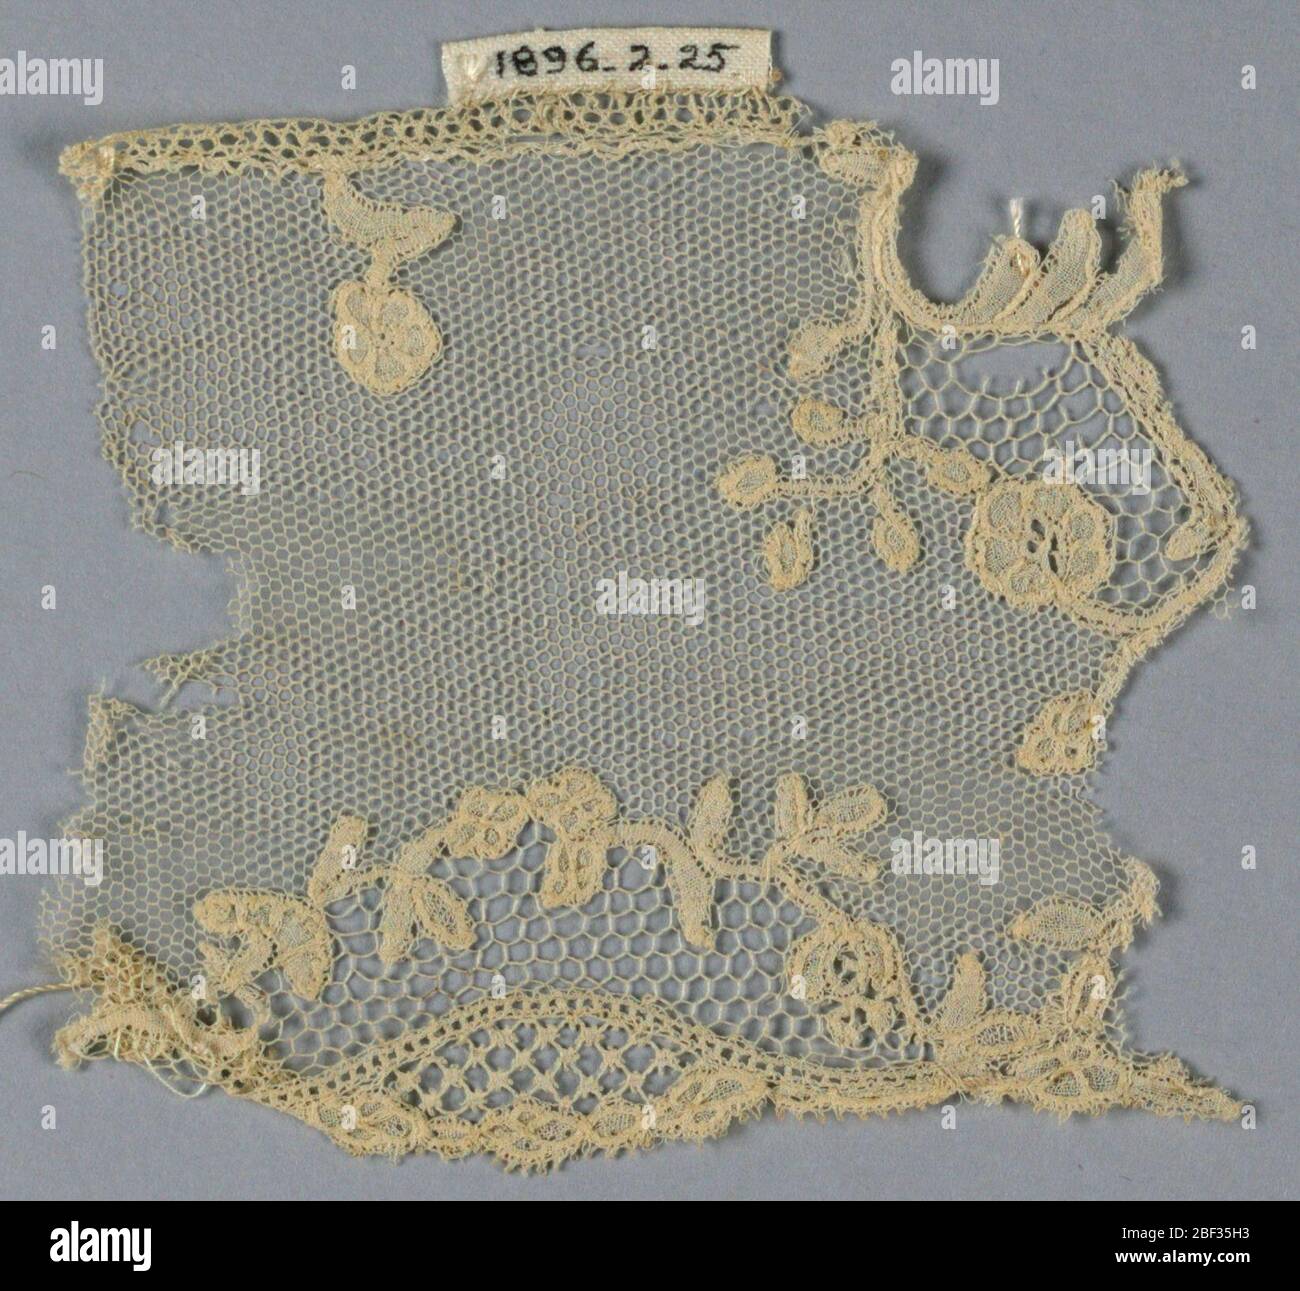 Fragment. Brussels-style fragment showing reserve area on the border filled with bobbin imitation of needlepoint openwork stitches and set off by tiny floral wreath. Vrai droschel ground. Stock Photo